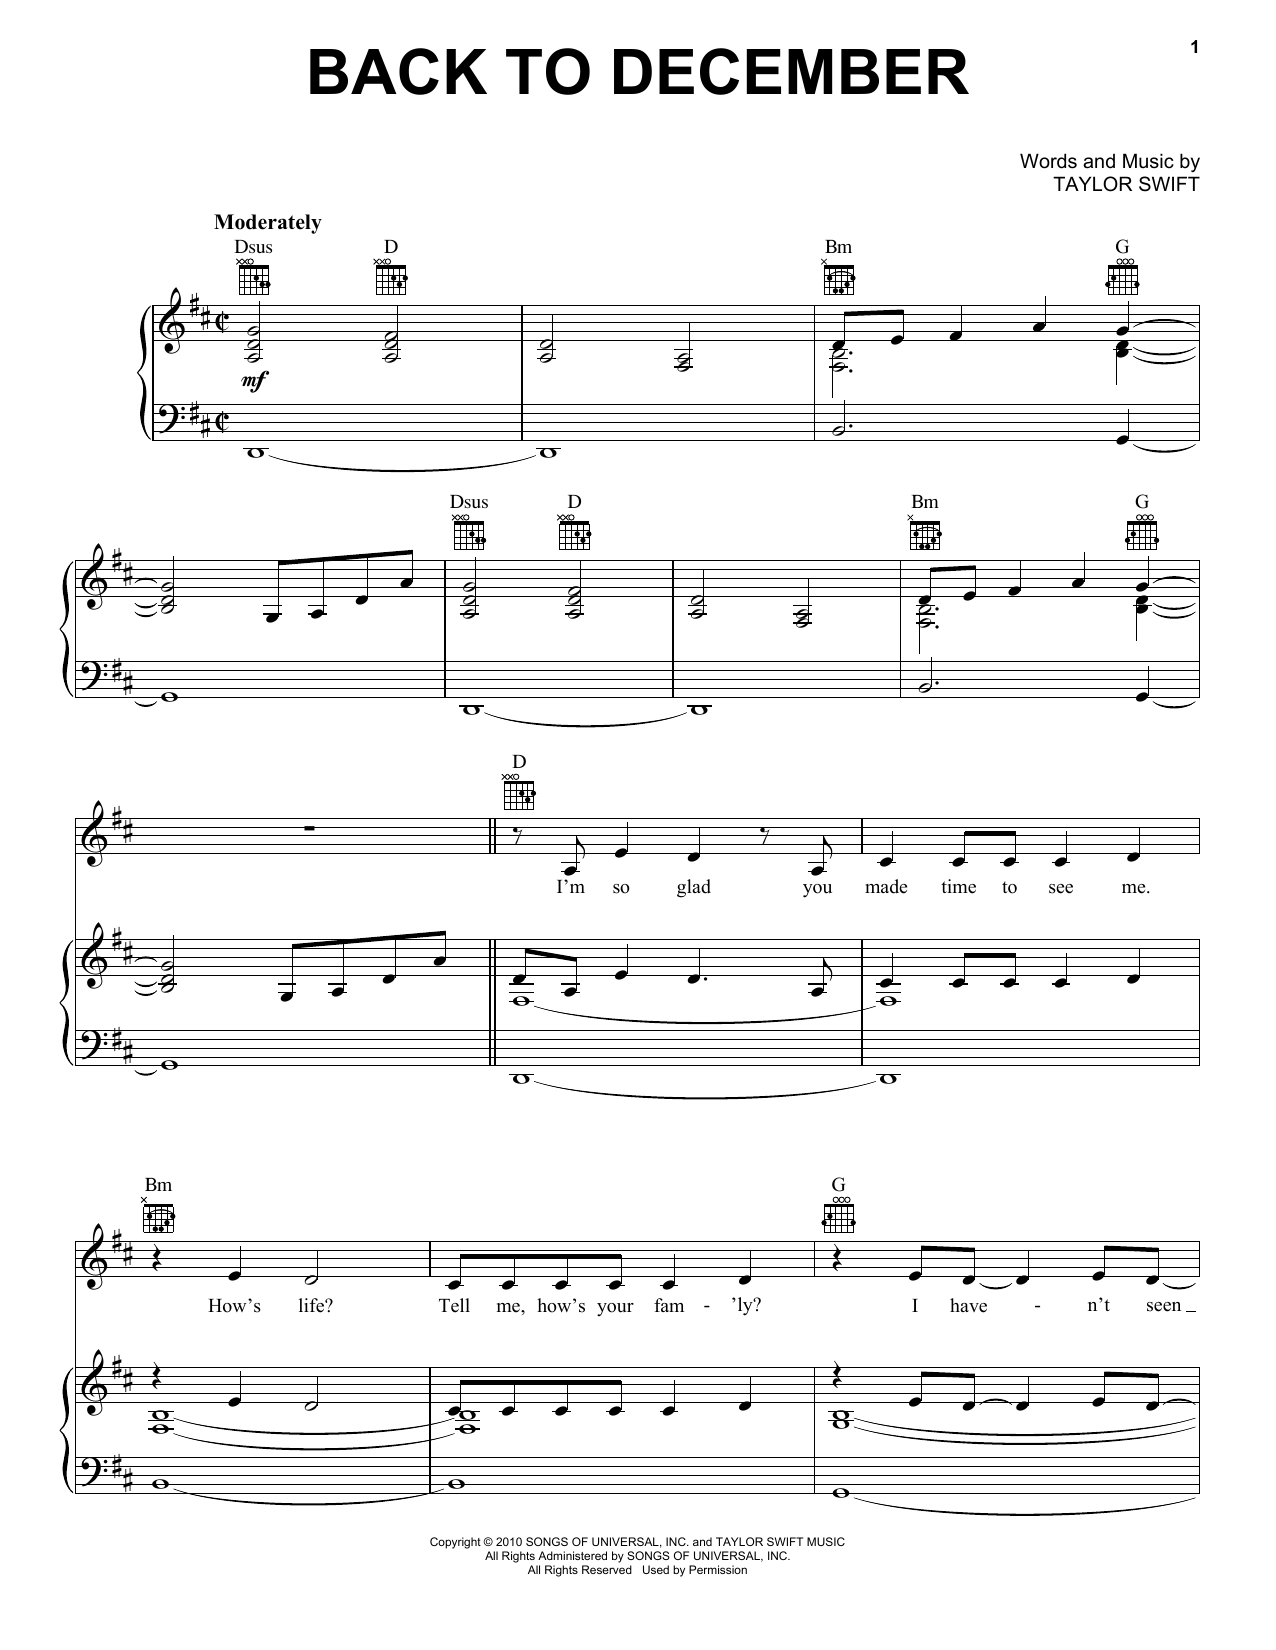 Taylor Swift Back To December sheet music preview music notes and score for Ukulele including 5 page(s)